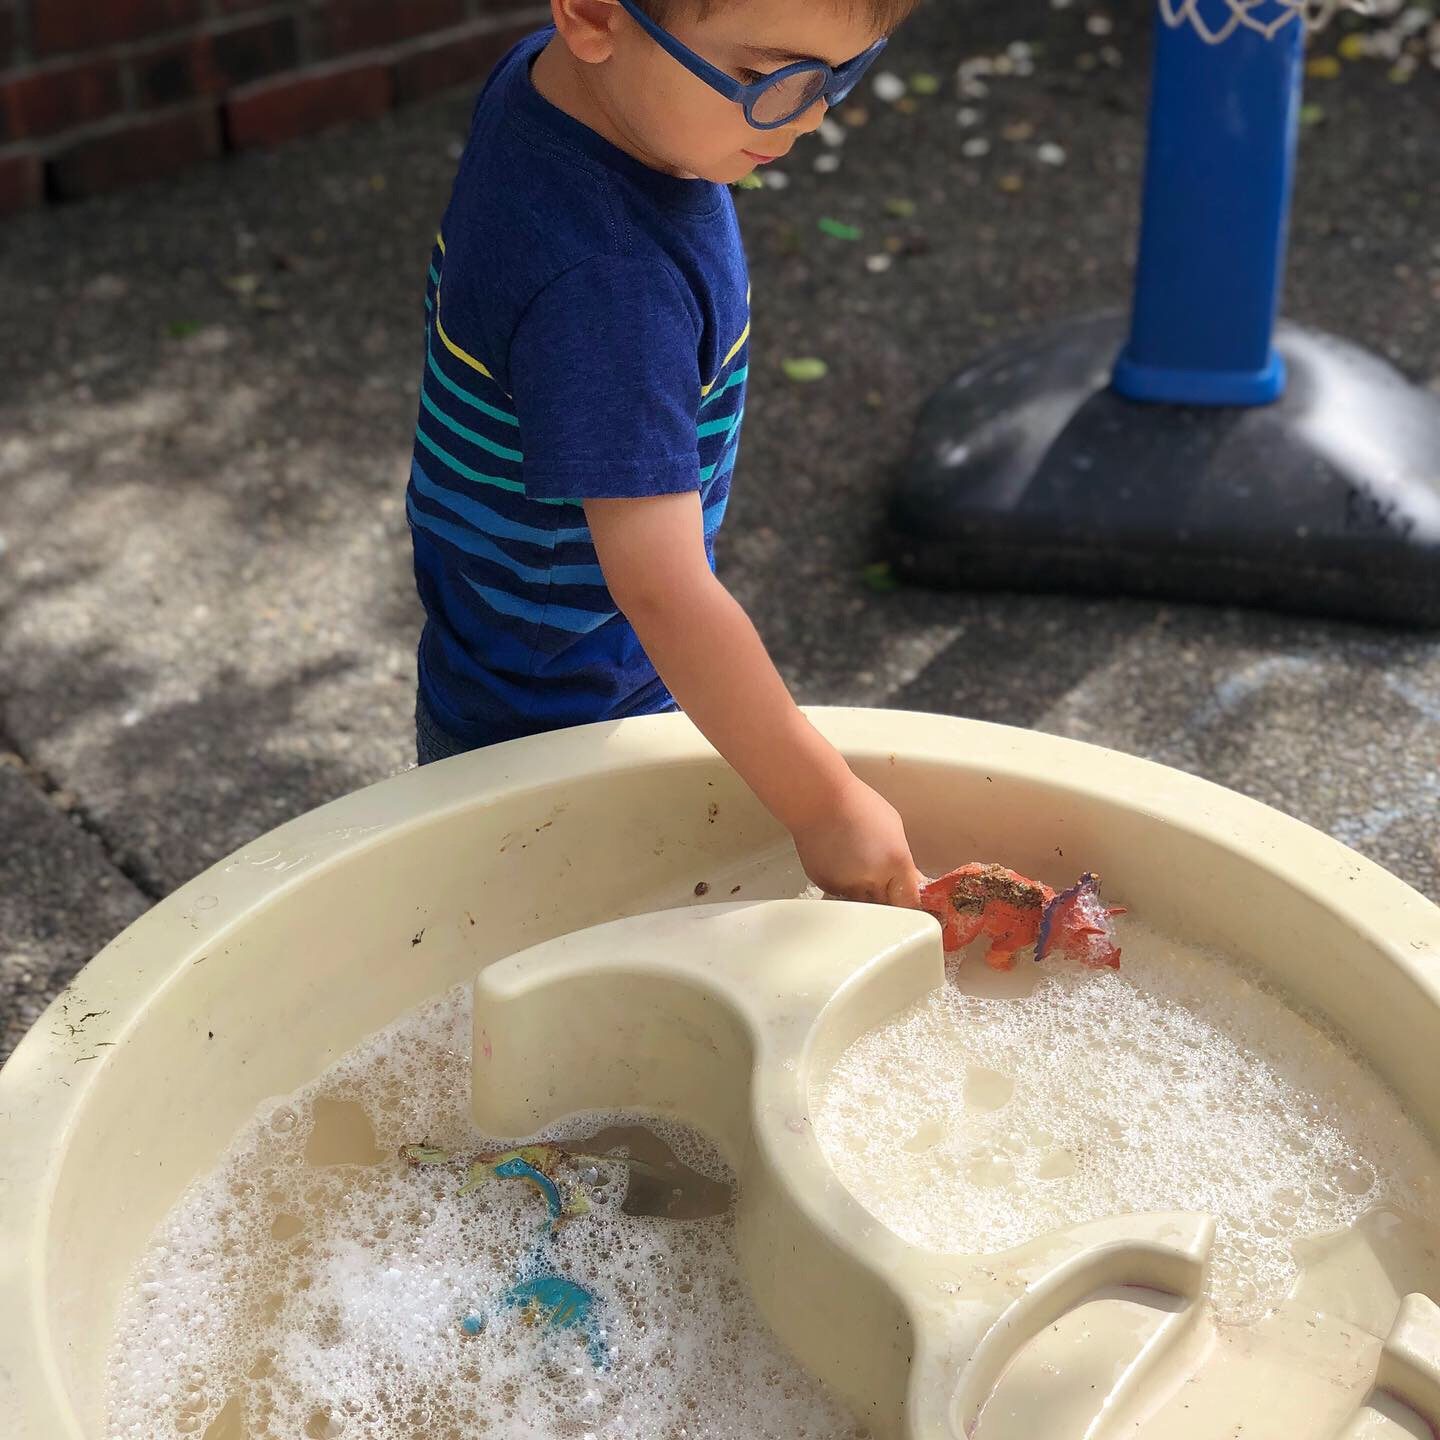 ? Dirty Dinosaurs ? Flour, water, and coffee grounds = this fabulous smelling “mud” to have our dinosaurs play in. Then time to clean them off ? Sensory bin using food ? I’ve been creating these types of bins for almost 20 years. This is a fun & Simple way you can play today with your child.